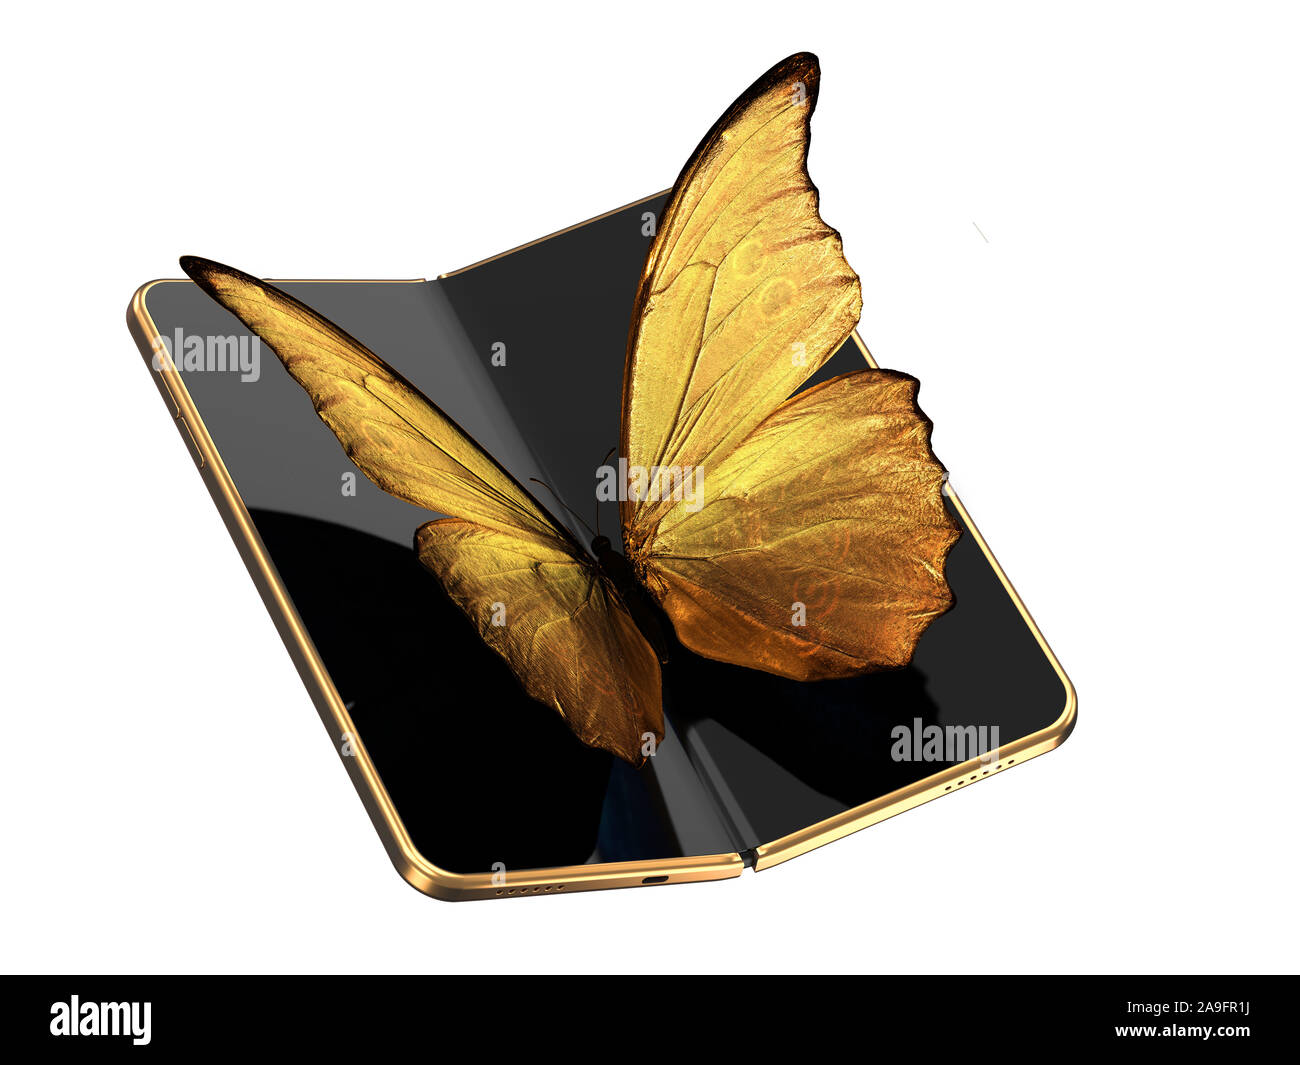 Concept of foldable smartphone folding on the longer side with golden butterfly sitting on the screen. Flexible smartphone isolated on white backgroun Stock Photo